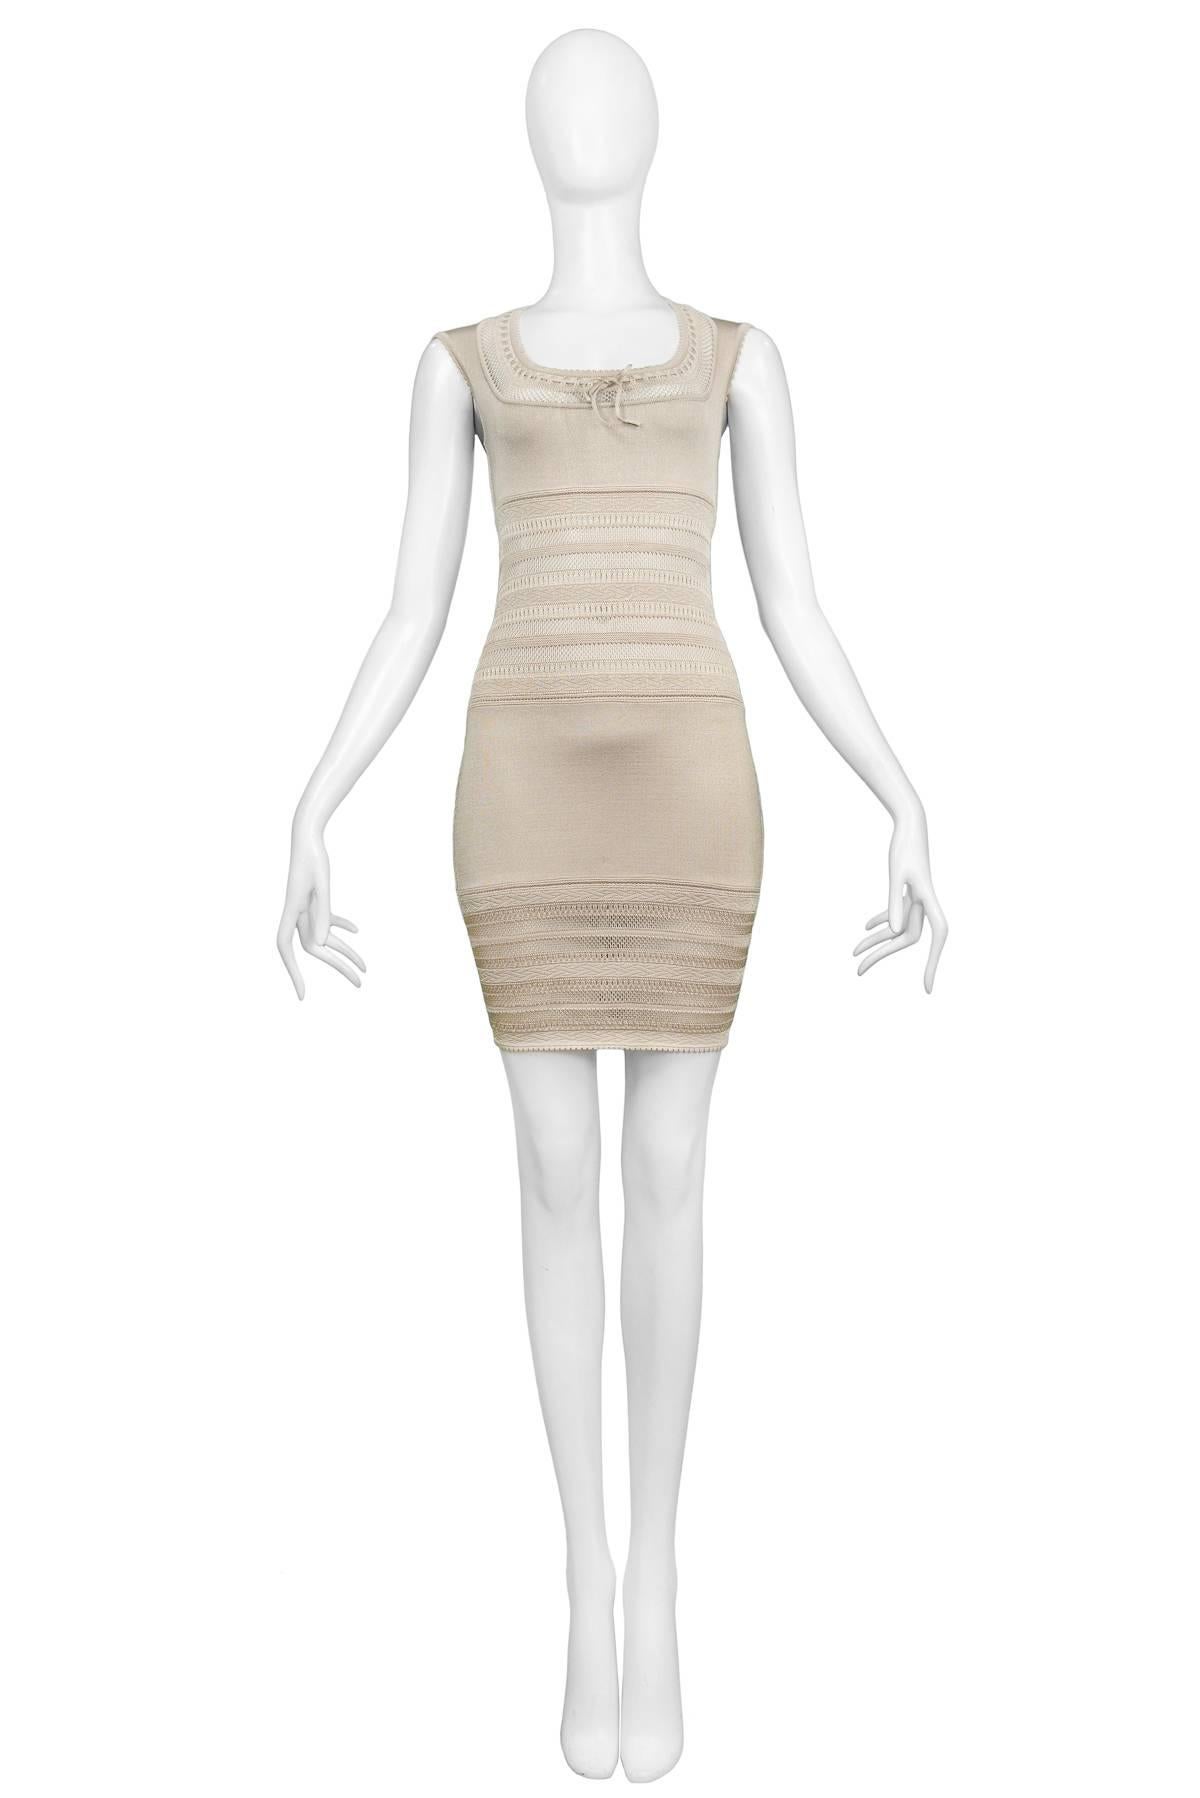 Vintage Azzedine Alaia beige fitted dress with knit lace bodice. Features square neckline, bow at front and zipper at back. The dress fits a today's size 4. Please contact us for measurements. 

Excellent Vintage Condition.

Measurements:
Bust 30